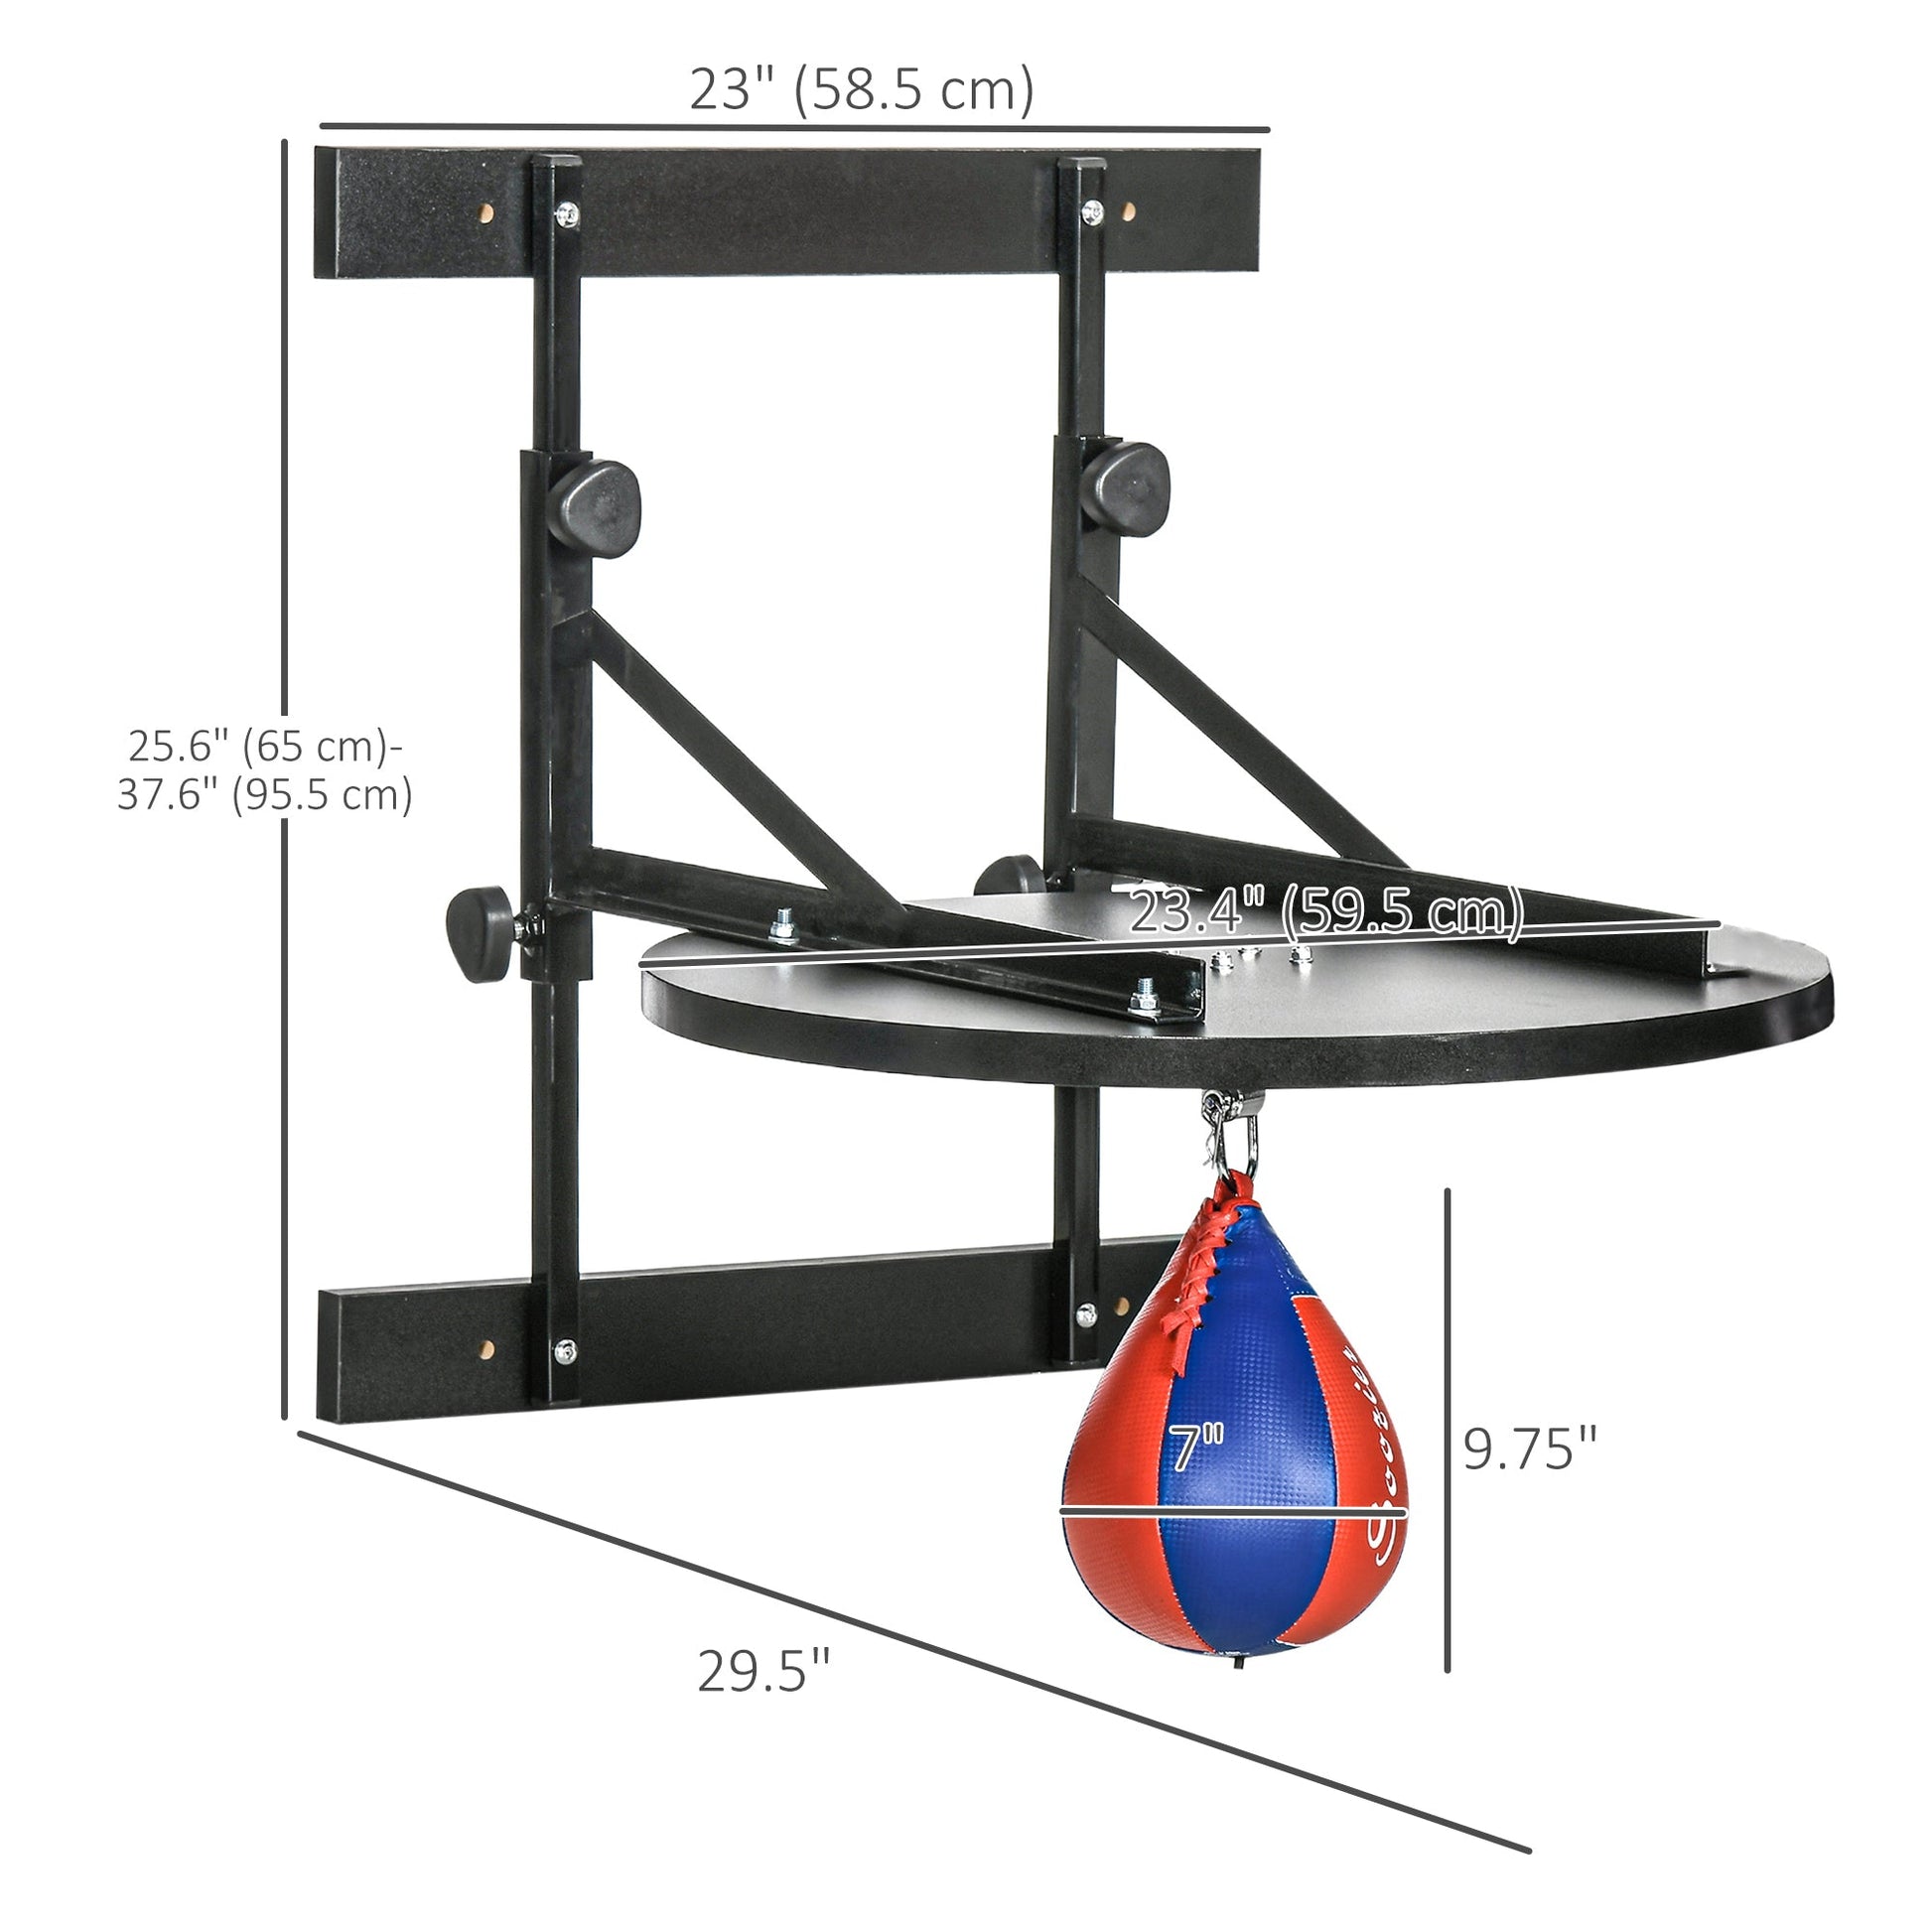 Adjustable Speed Bag Platform, Wall Mounted Speed Bag Boxing, 360° Swivel Training Equipment for Home, Gym at Gallery Canada